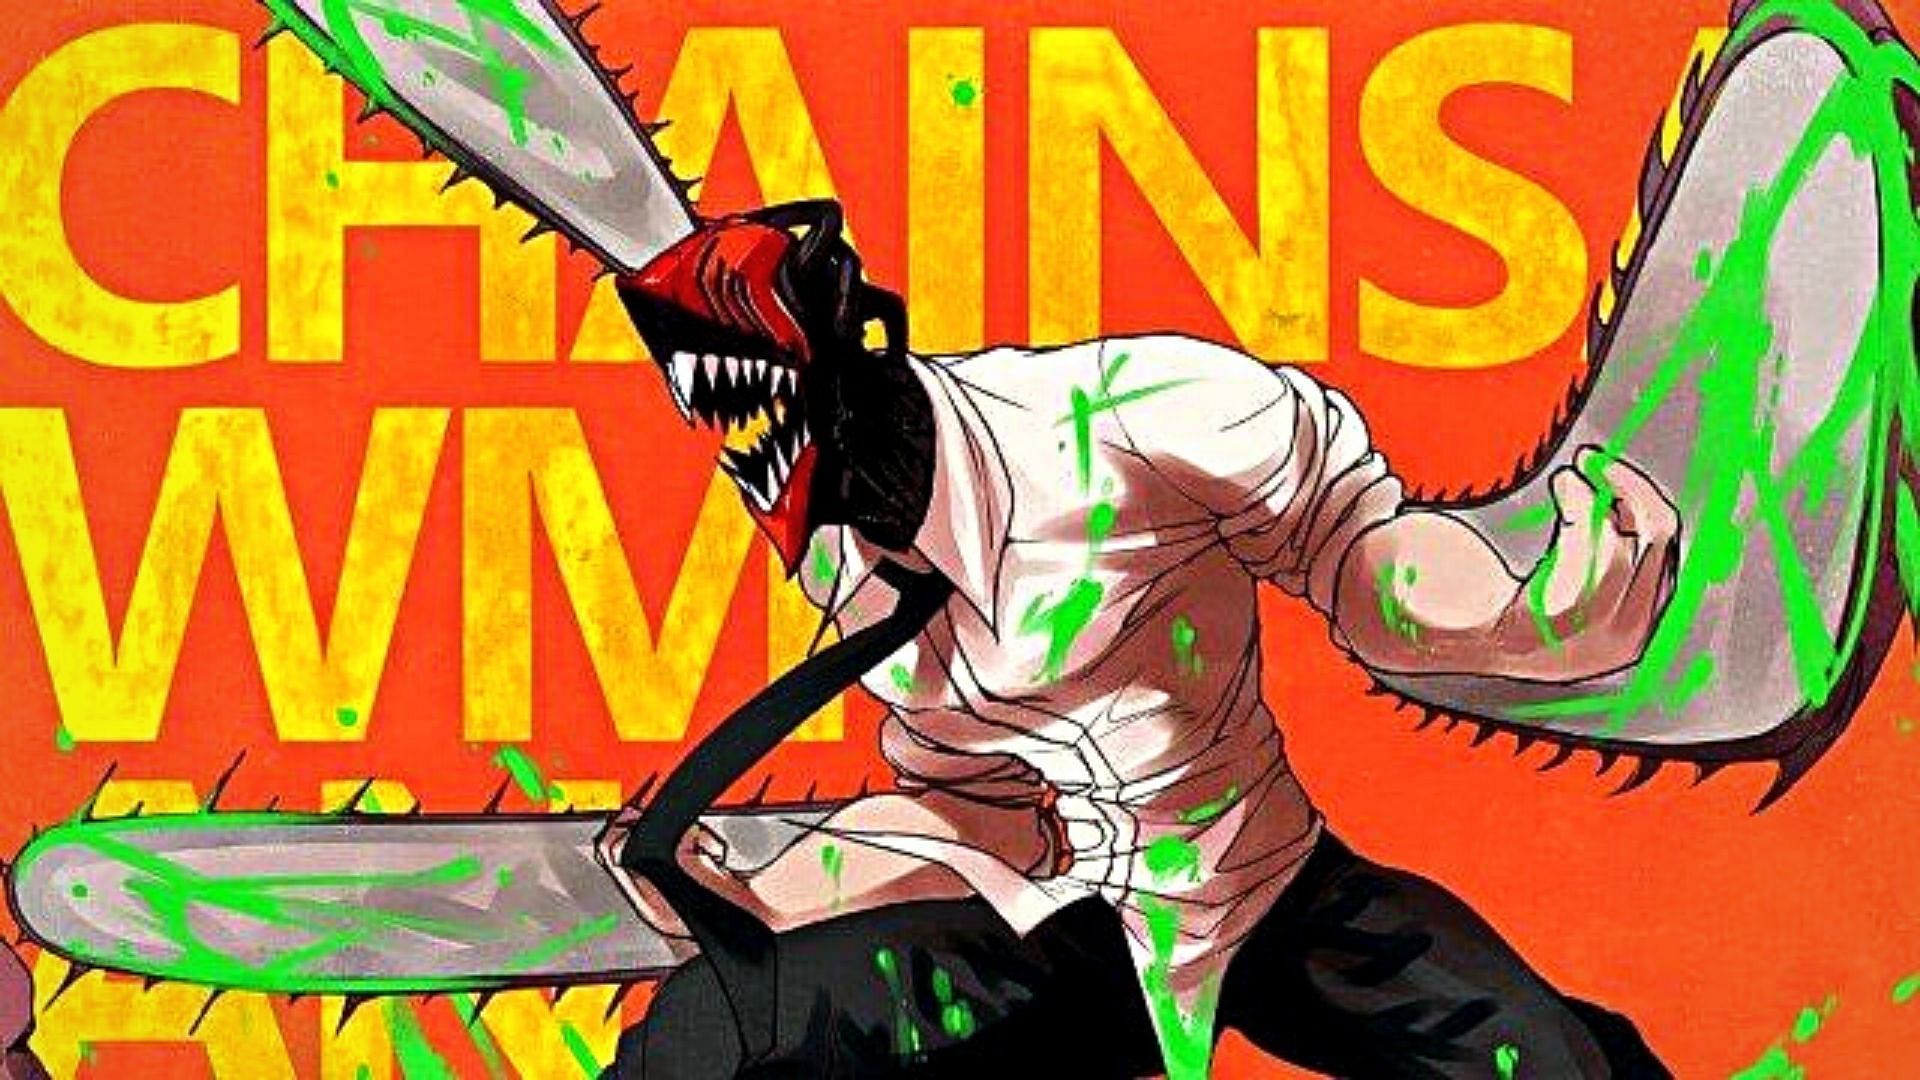 Chainsaw Man Season 2 Release Date Speculations!! 